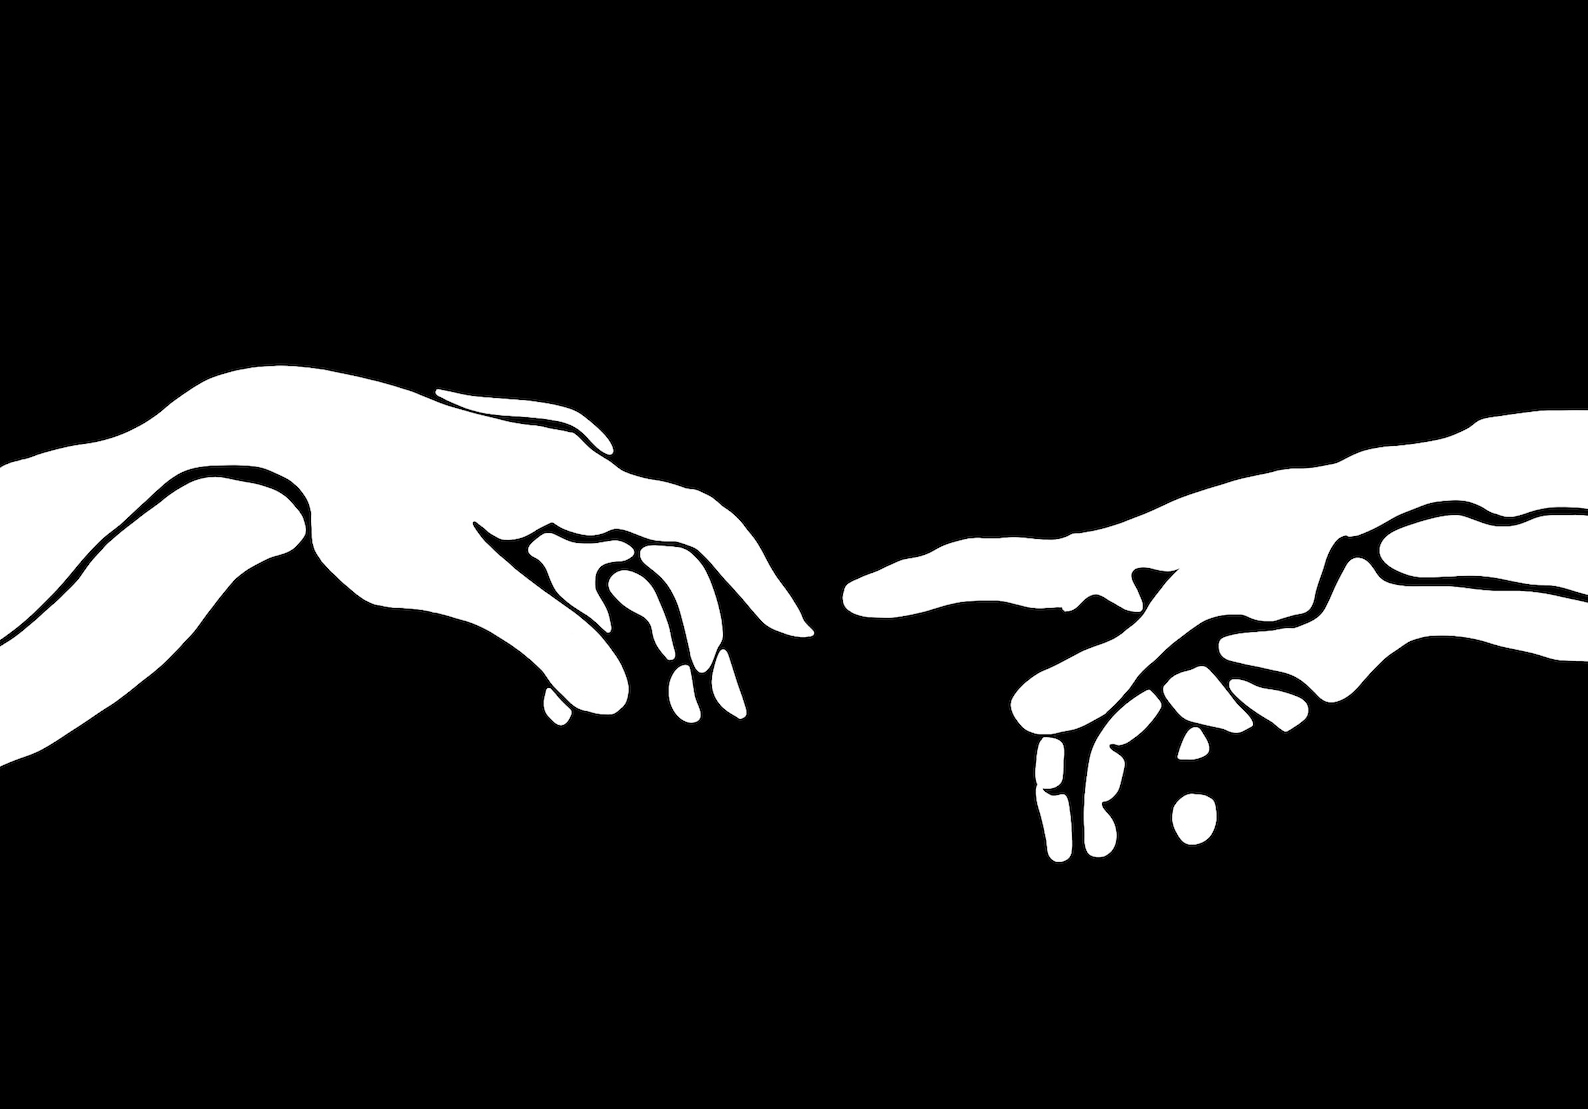 The Creation of Adam Black and White Illustration - Etsy